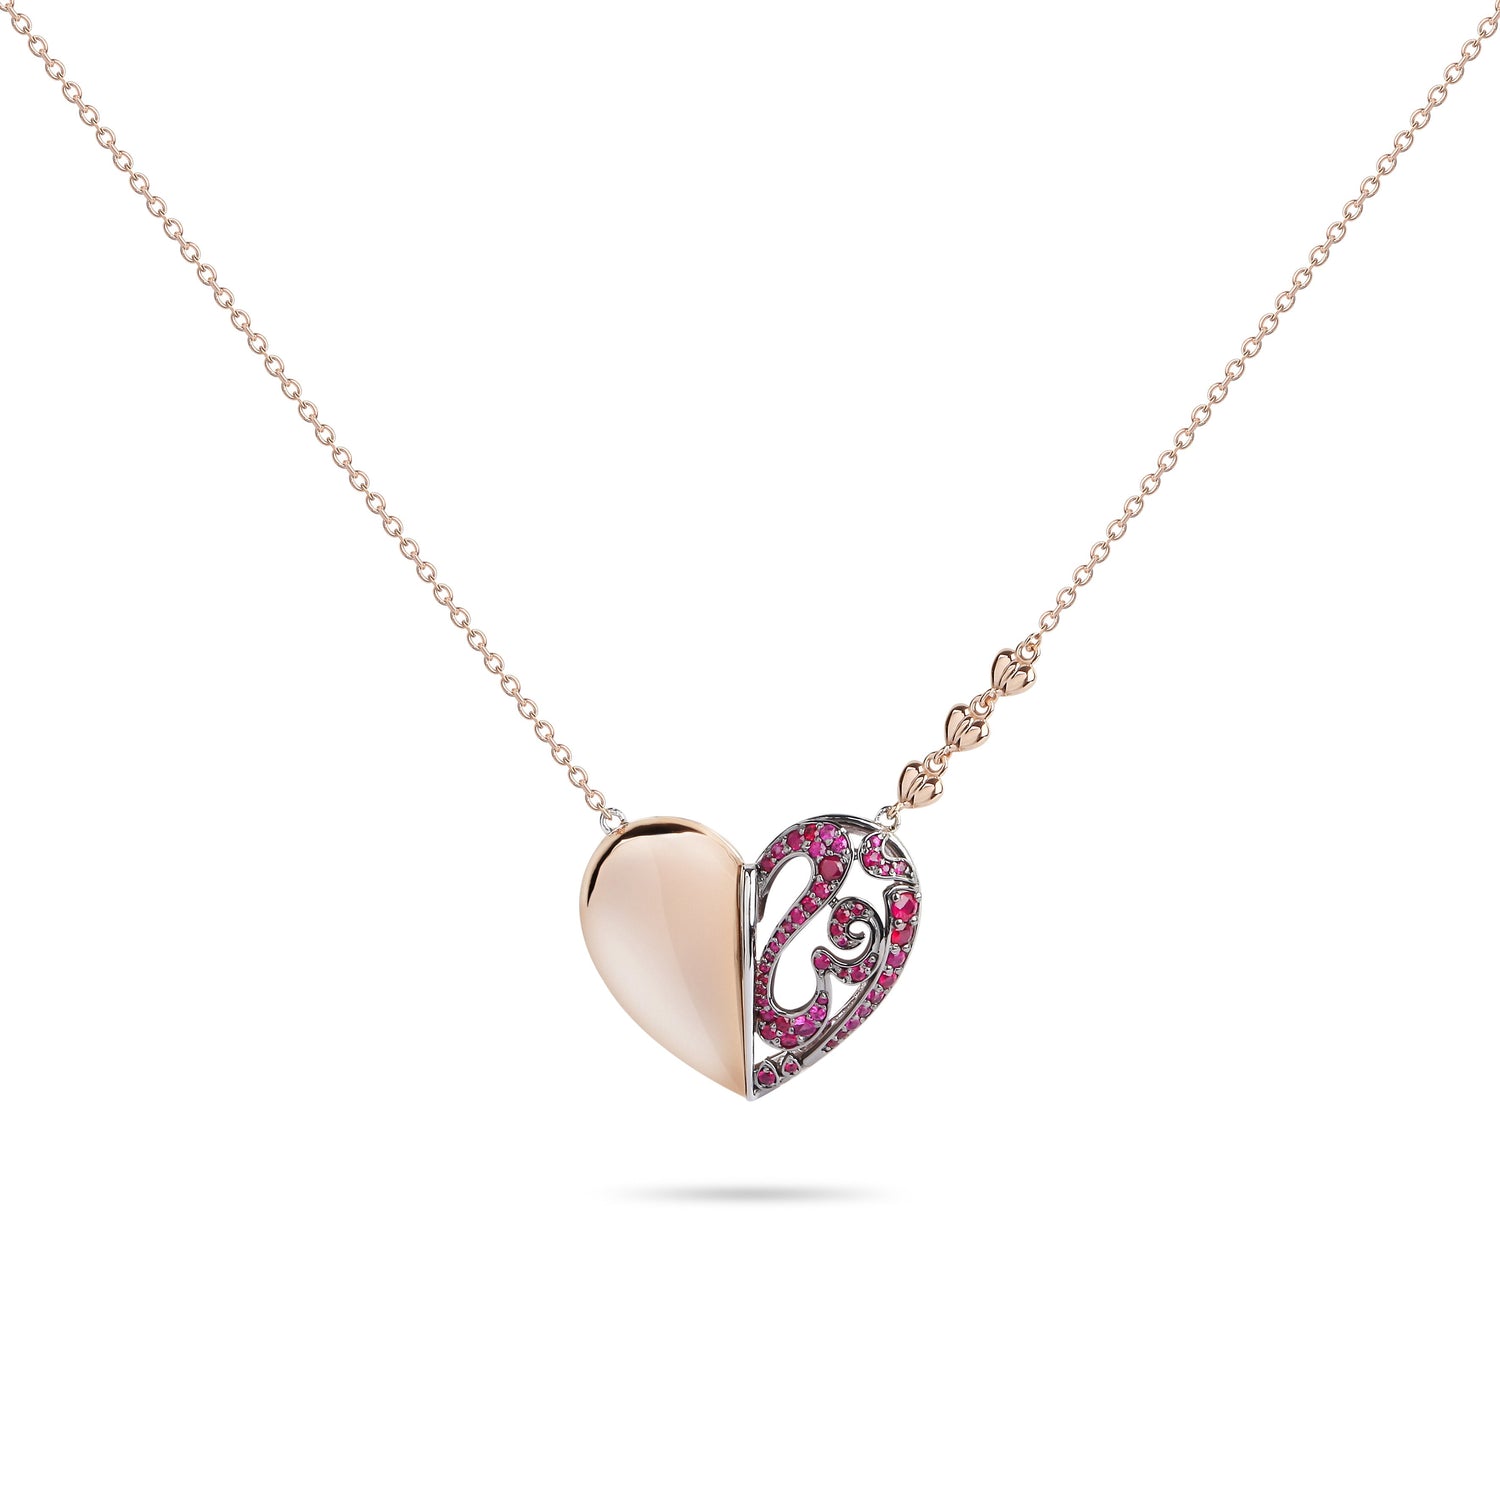 The Mothers' Day Edition - Heart Shaped Custom Arabic Letter "Mother" Rose Gold & Ruby Precious Stones Necklace | Chain Necklace Women